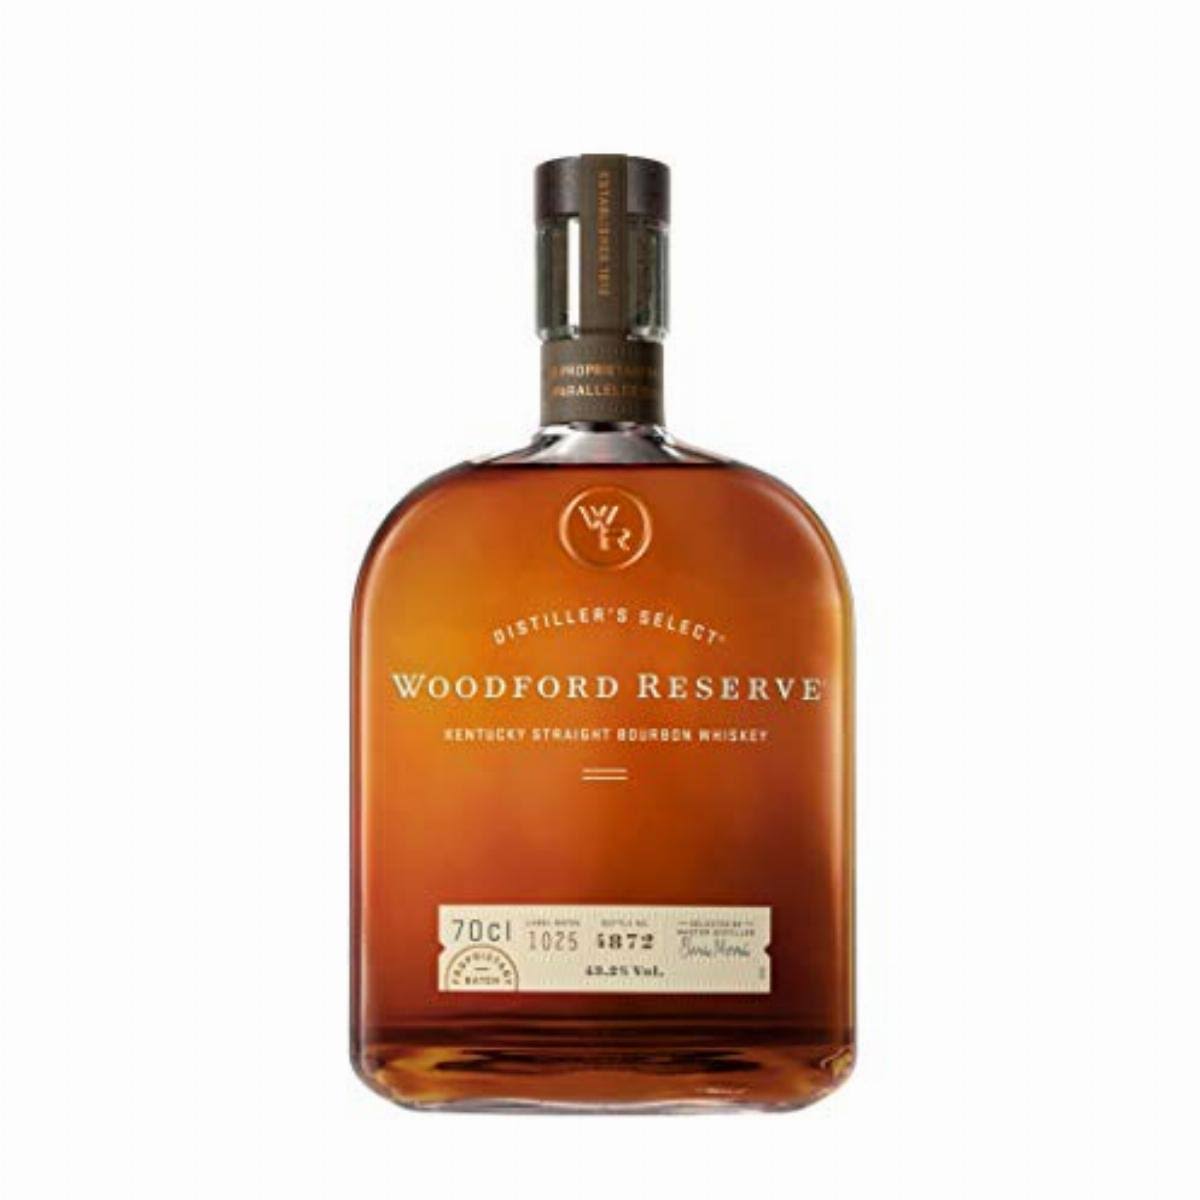 Woodford Reserve Bourbon Whiskey, 70 CL